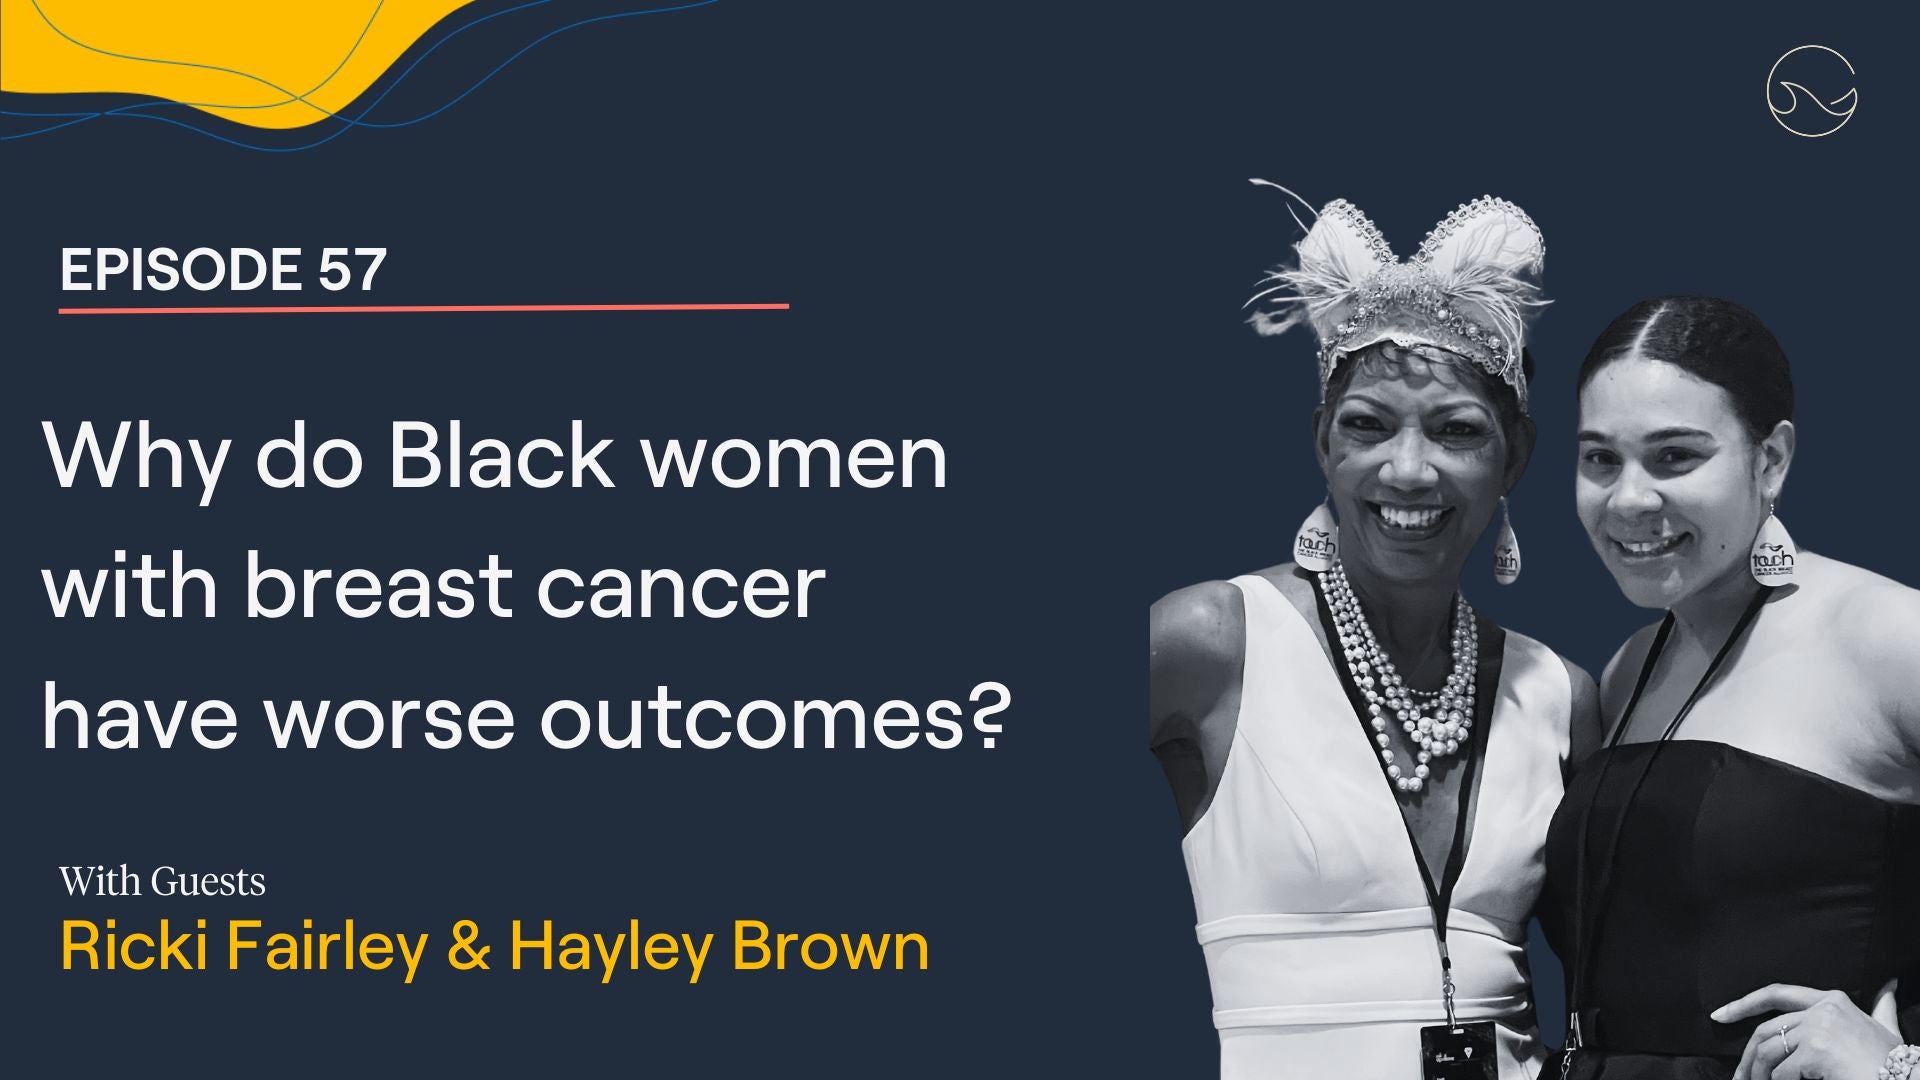 Load video: Black women with breast cancer have higher mortality rates and recurrence rates than white women. On this episode, we speak with Ricki Fairley, breast cancer survivor and co-founder of TOUCH, The Black Breast Cancer Alliance and her daughter Hayley Brown, Director of Programs, about why health equity is such a major issue, and the need for better access to care and more research on the biology of the disease in Black women.